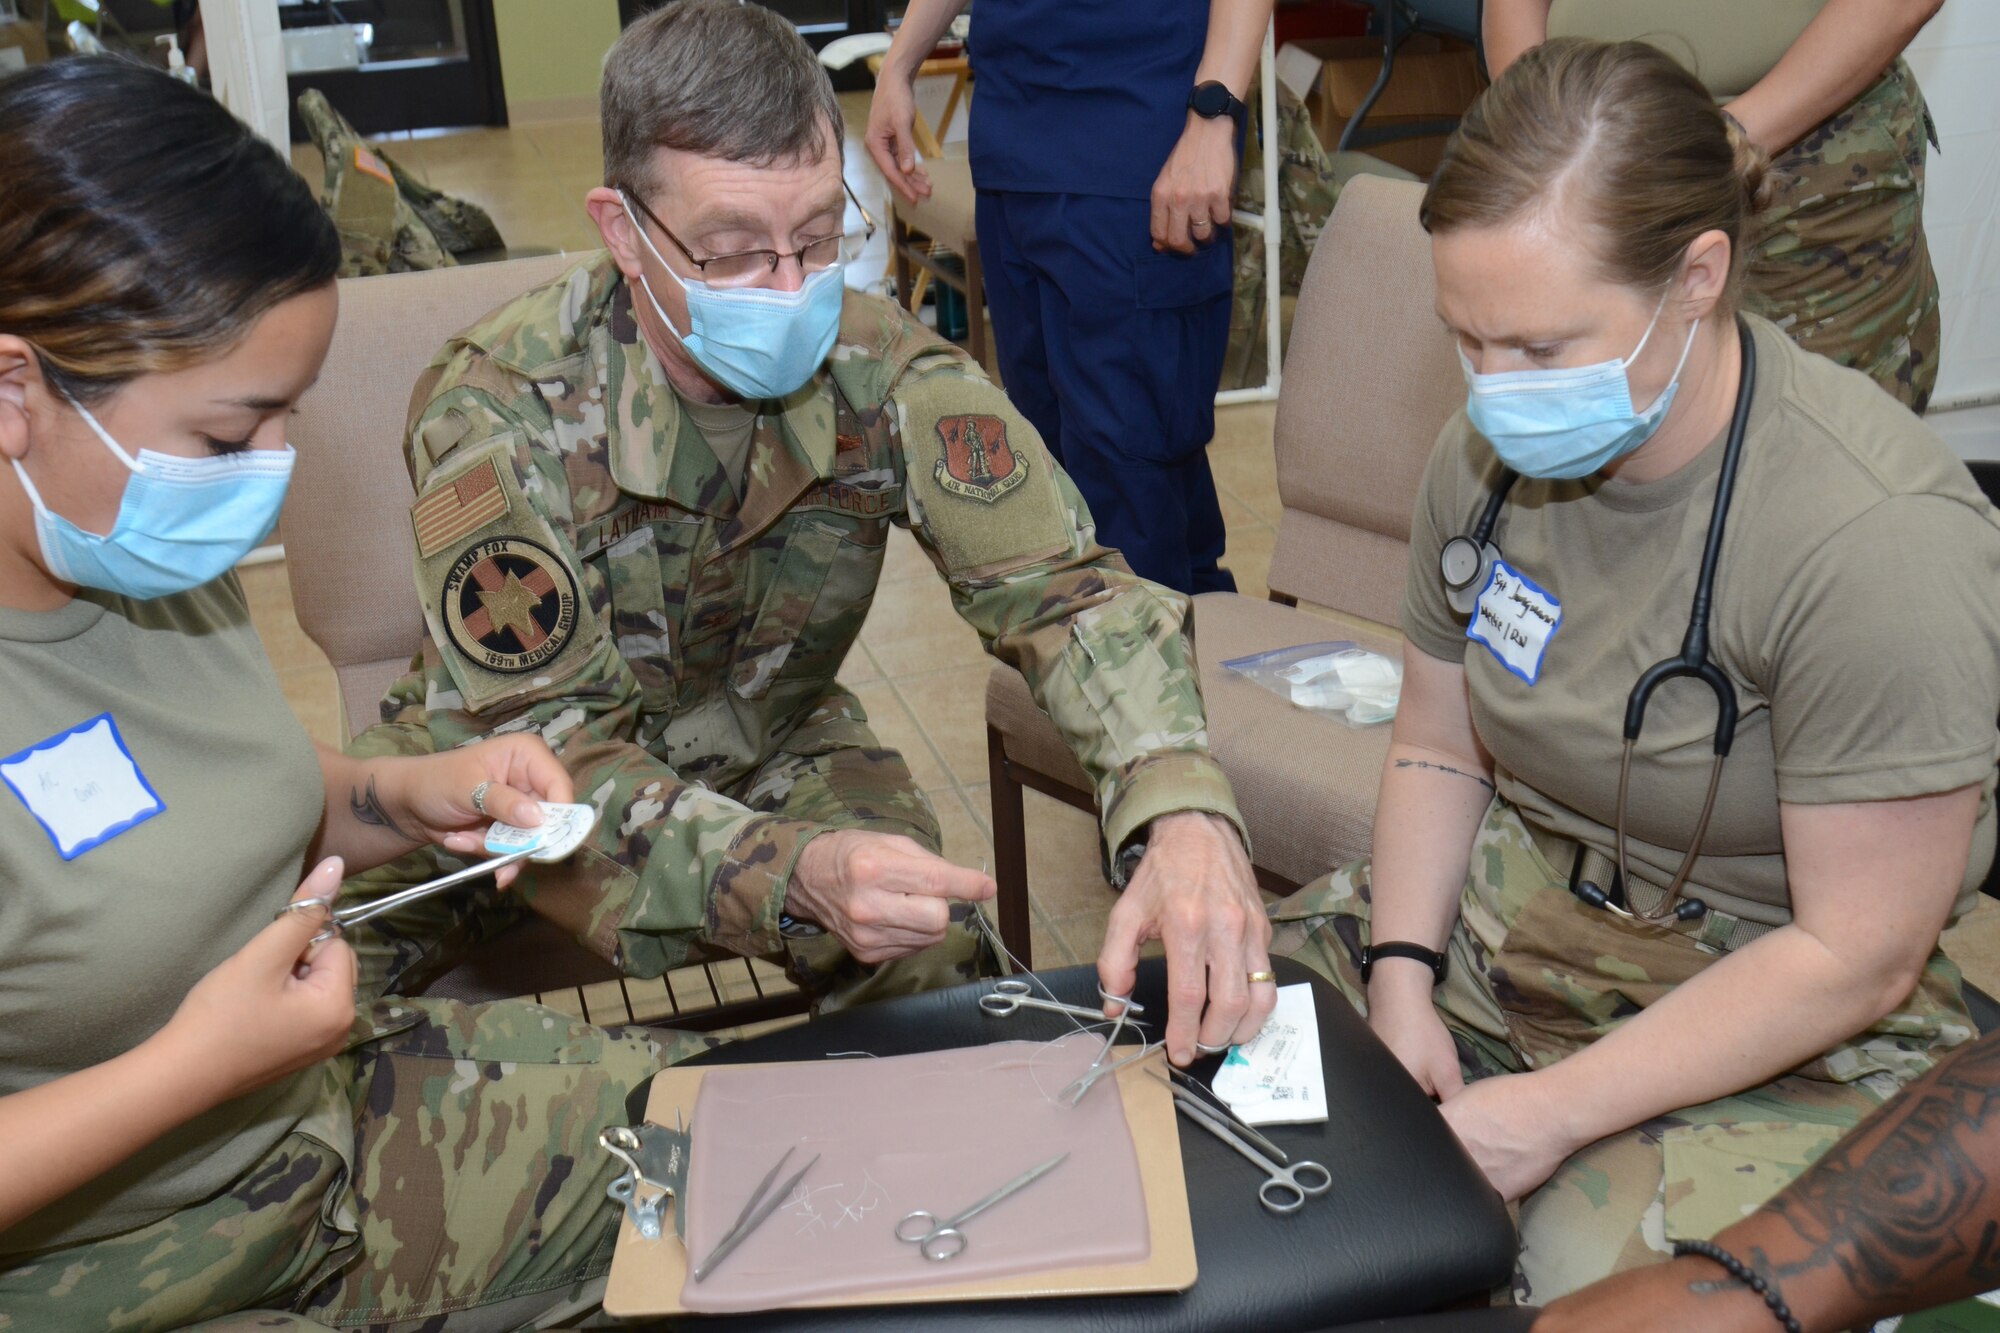 U.S. Air Force Col. (Dr.) Phillip Latham, assigned to the 169th Fighter Wing, McEntire Joint National Guard Base, South Carolina, supports Operation Healthy Delta, a Department of Defense sponsored Innovative Readiness Training program designed to provide military training opportunities by providing key services to local citizens. Latham is practicing suturing with Airmen from the 162nd Wing Tucson Arizona during a break in the action at Sikeston, Missouri June 15, 2021. (U.S. Air National Guard photo by Lt. Col. Jim St.Clair, 169th Fighter Wing Public Affairs)